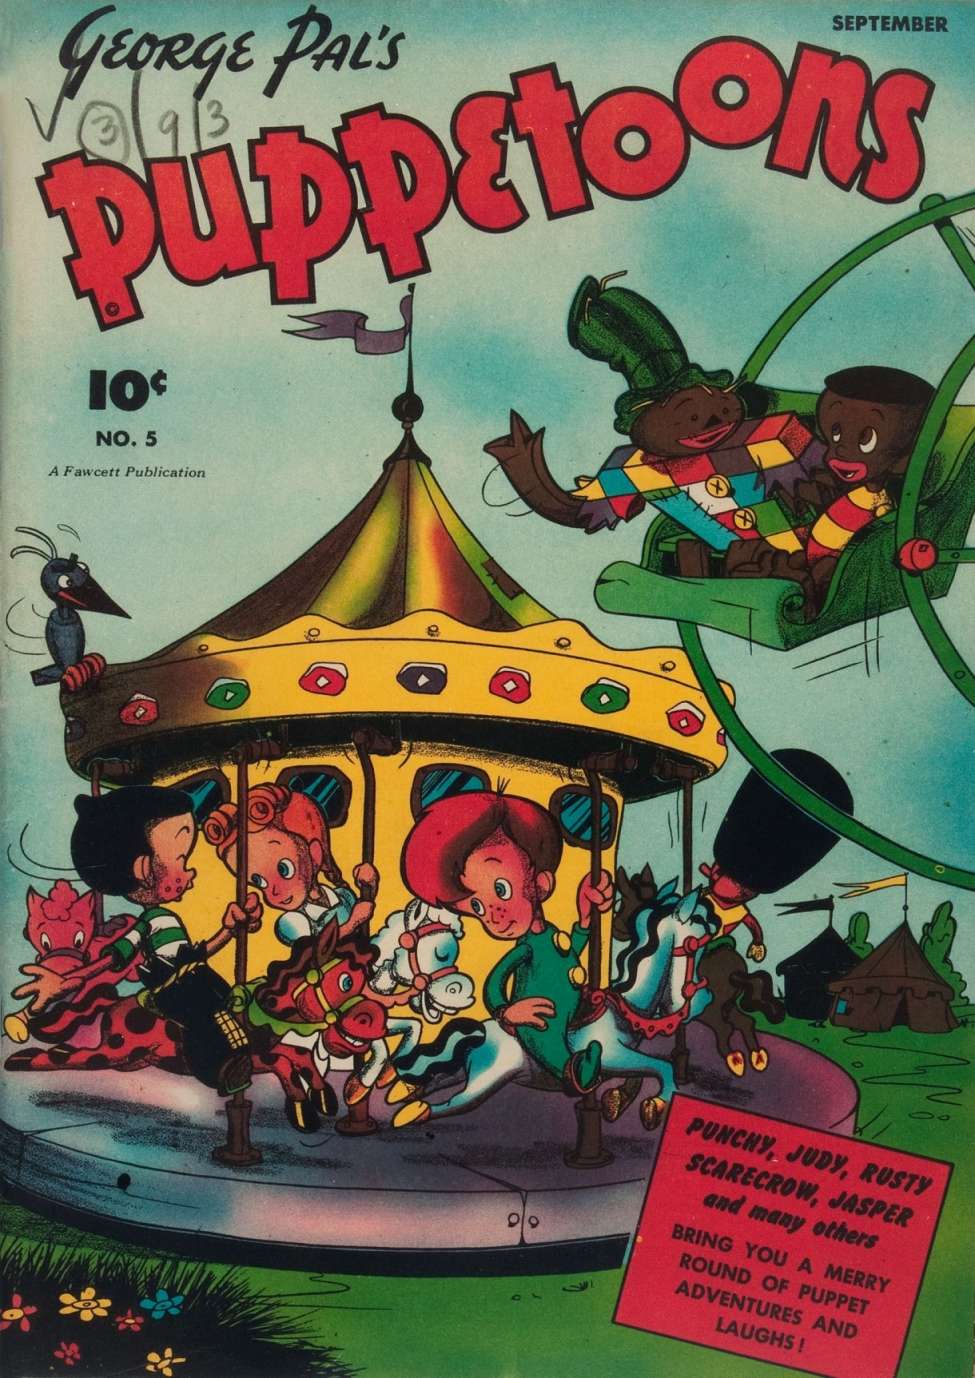 Book Cover For George Pal's Puppetoons 5